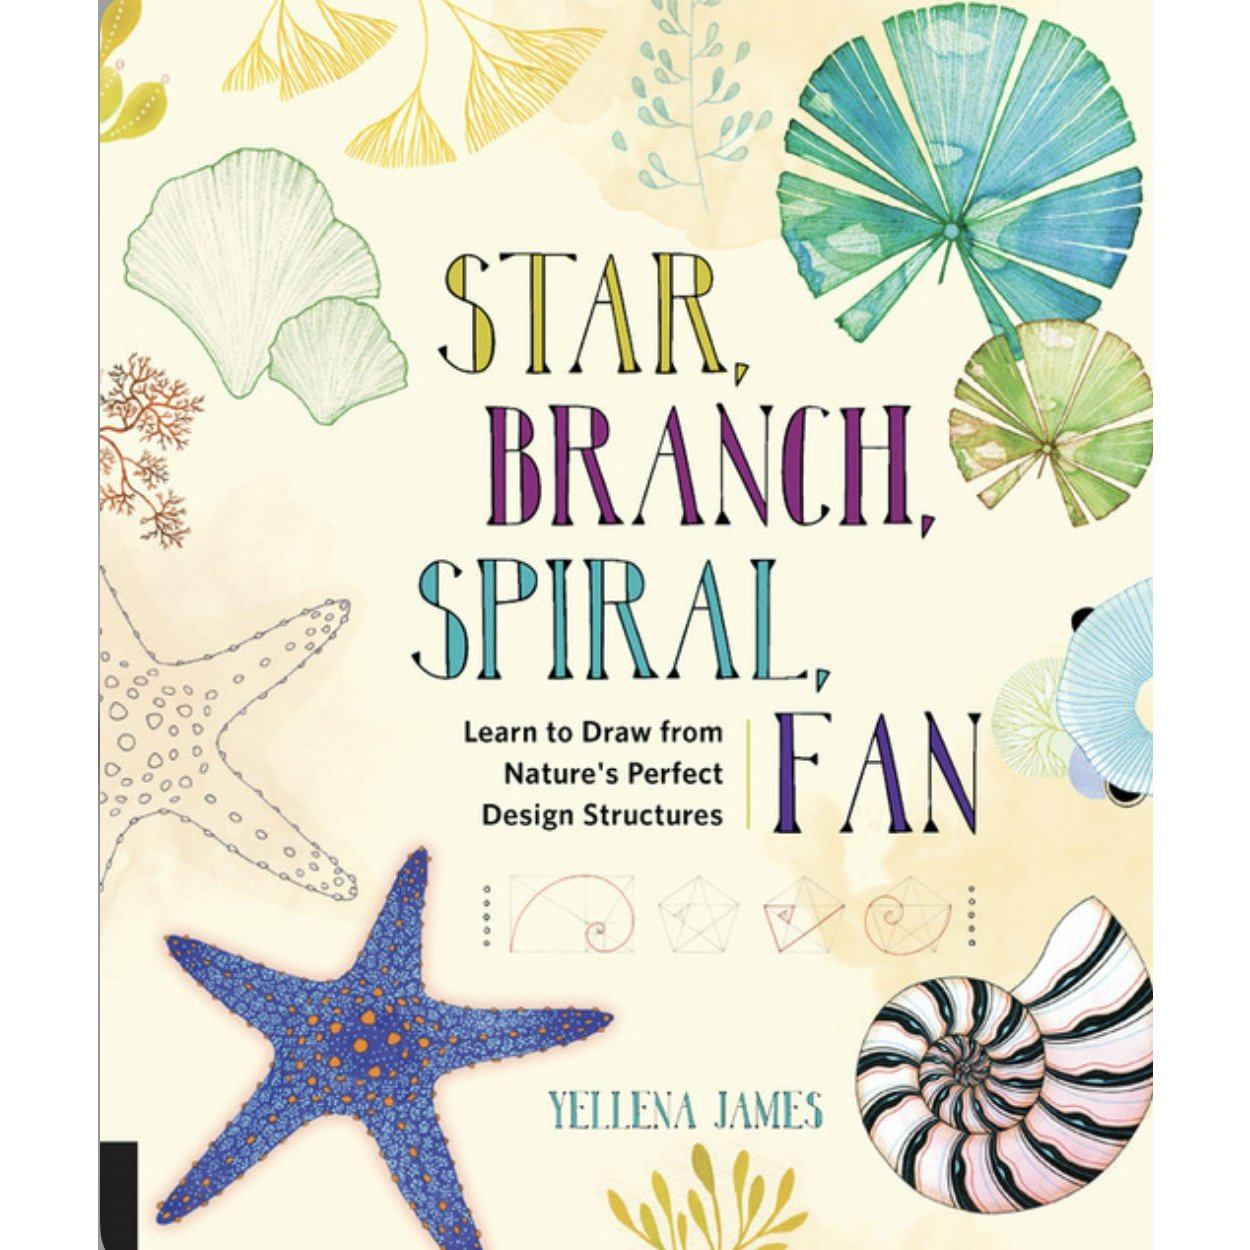 Star, Branch, Spiral, Fan Learn to Draw from Nature’s Perfect Design Structuresp